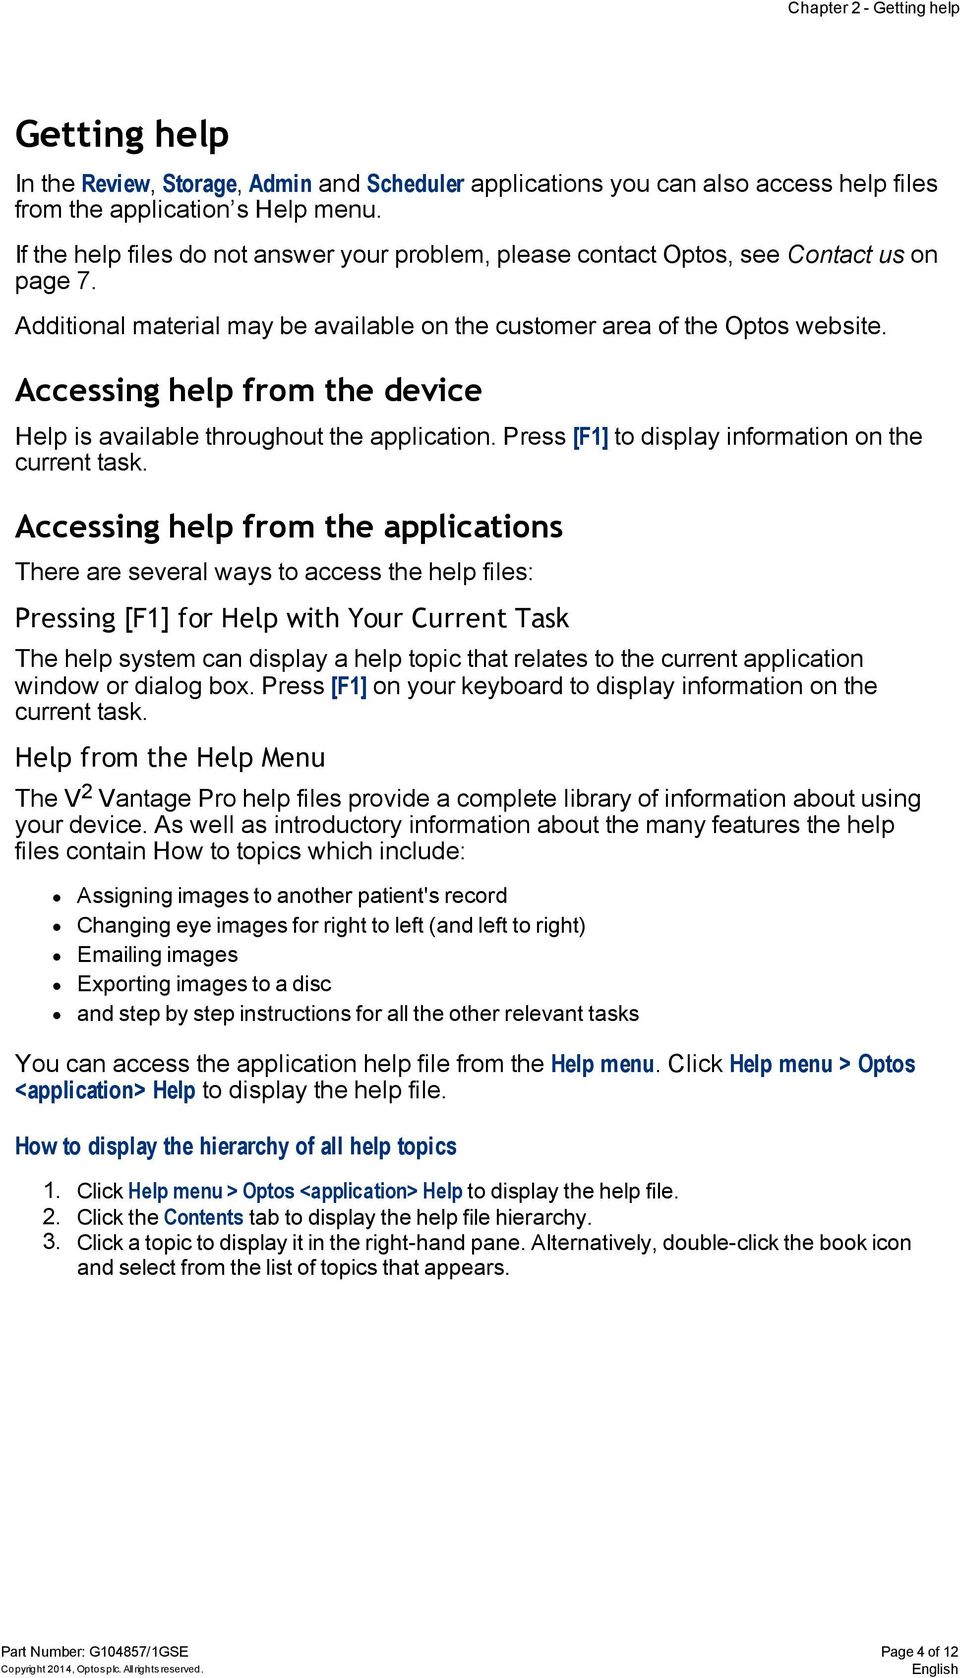 Accessing help from the device Help is available throughout the application. Press [F1] to display information on the current task.